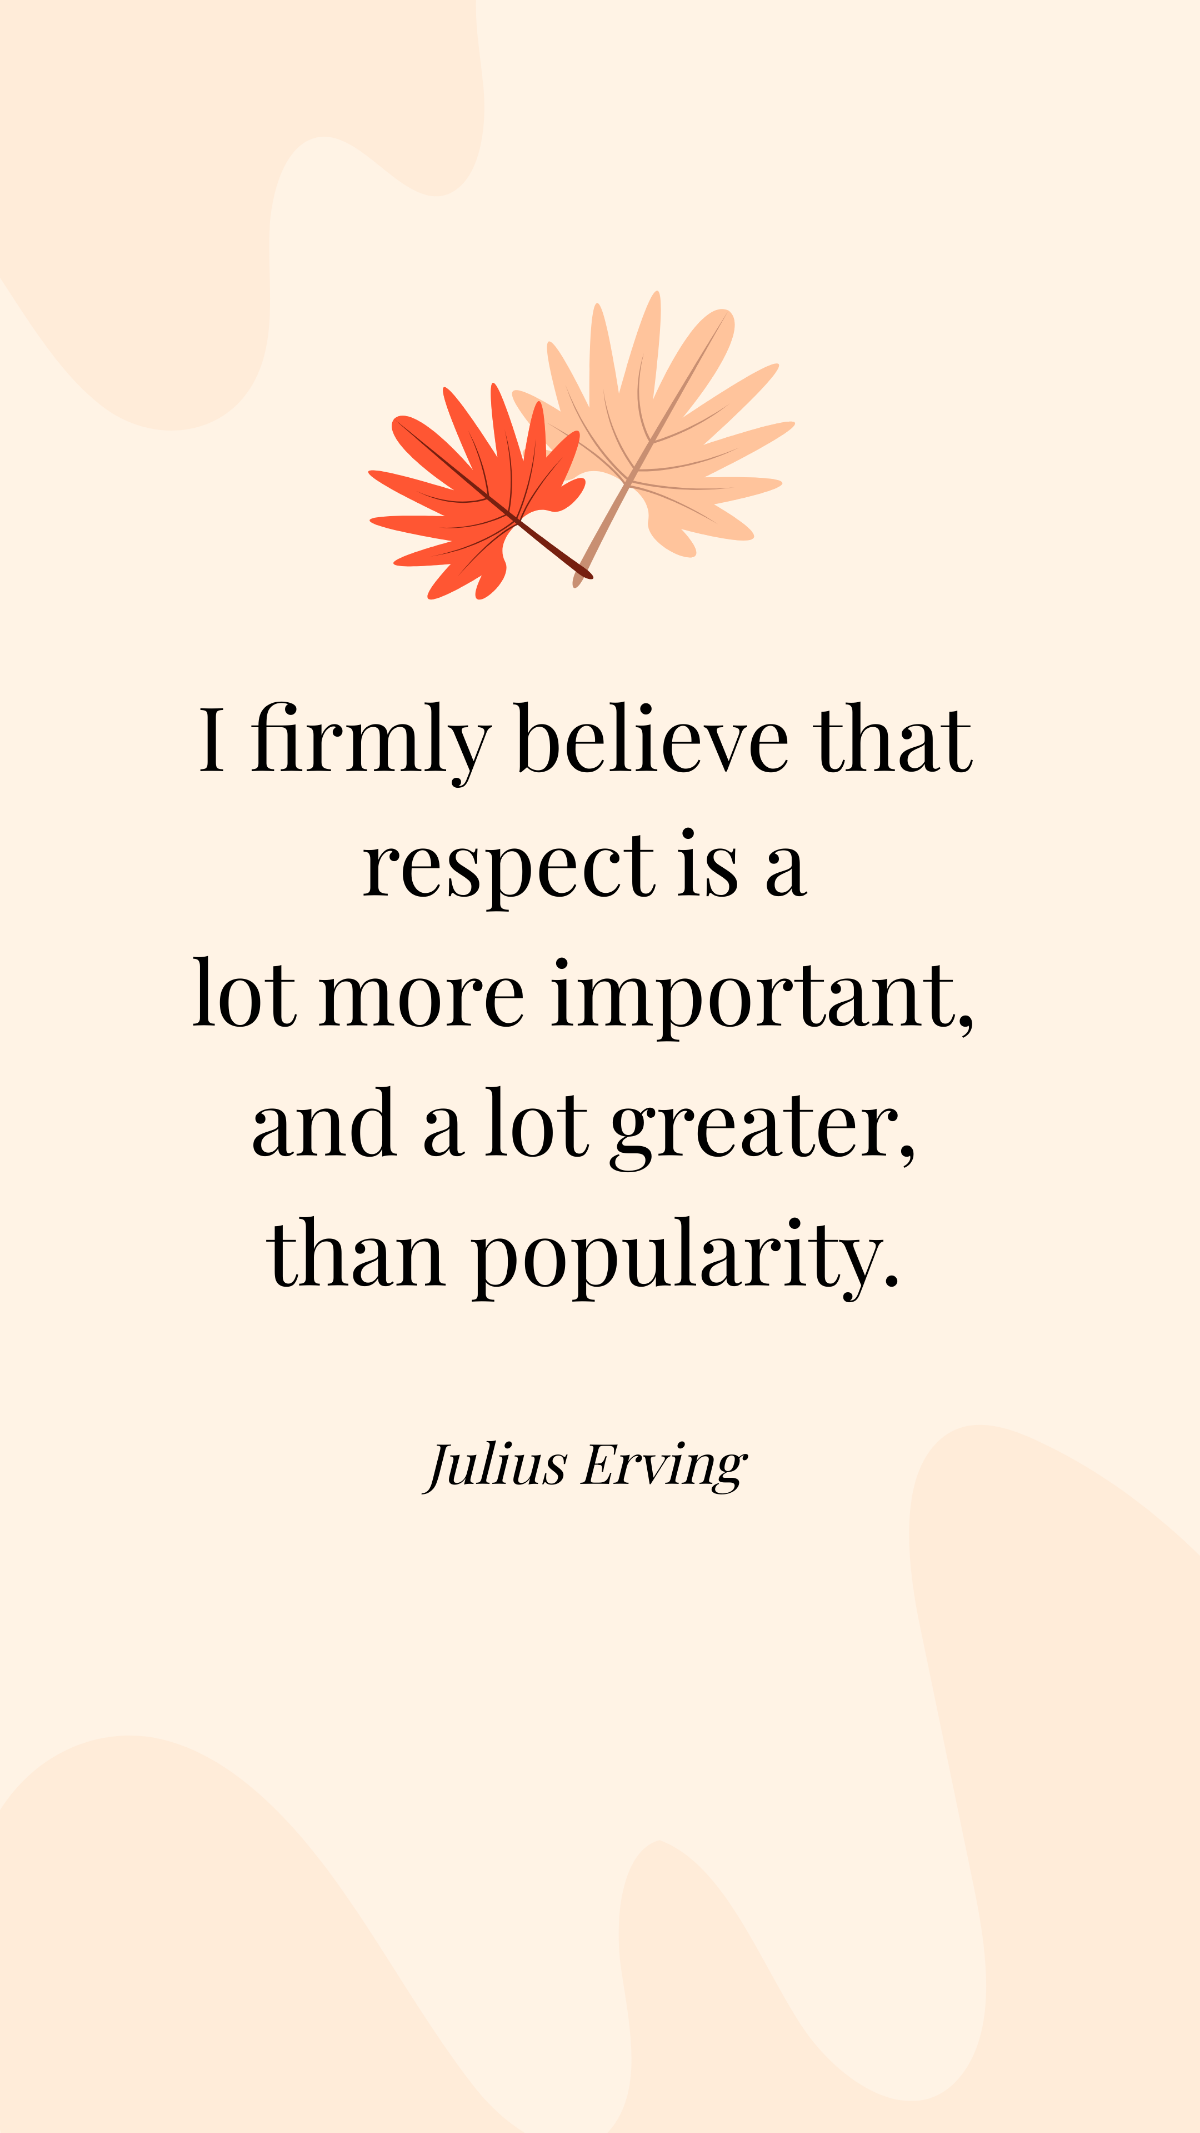 Julius Erving- I firmly believe that respect is a lot more important, and a lot greater, than popularity.  Template